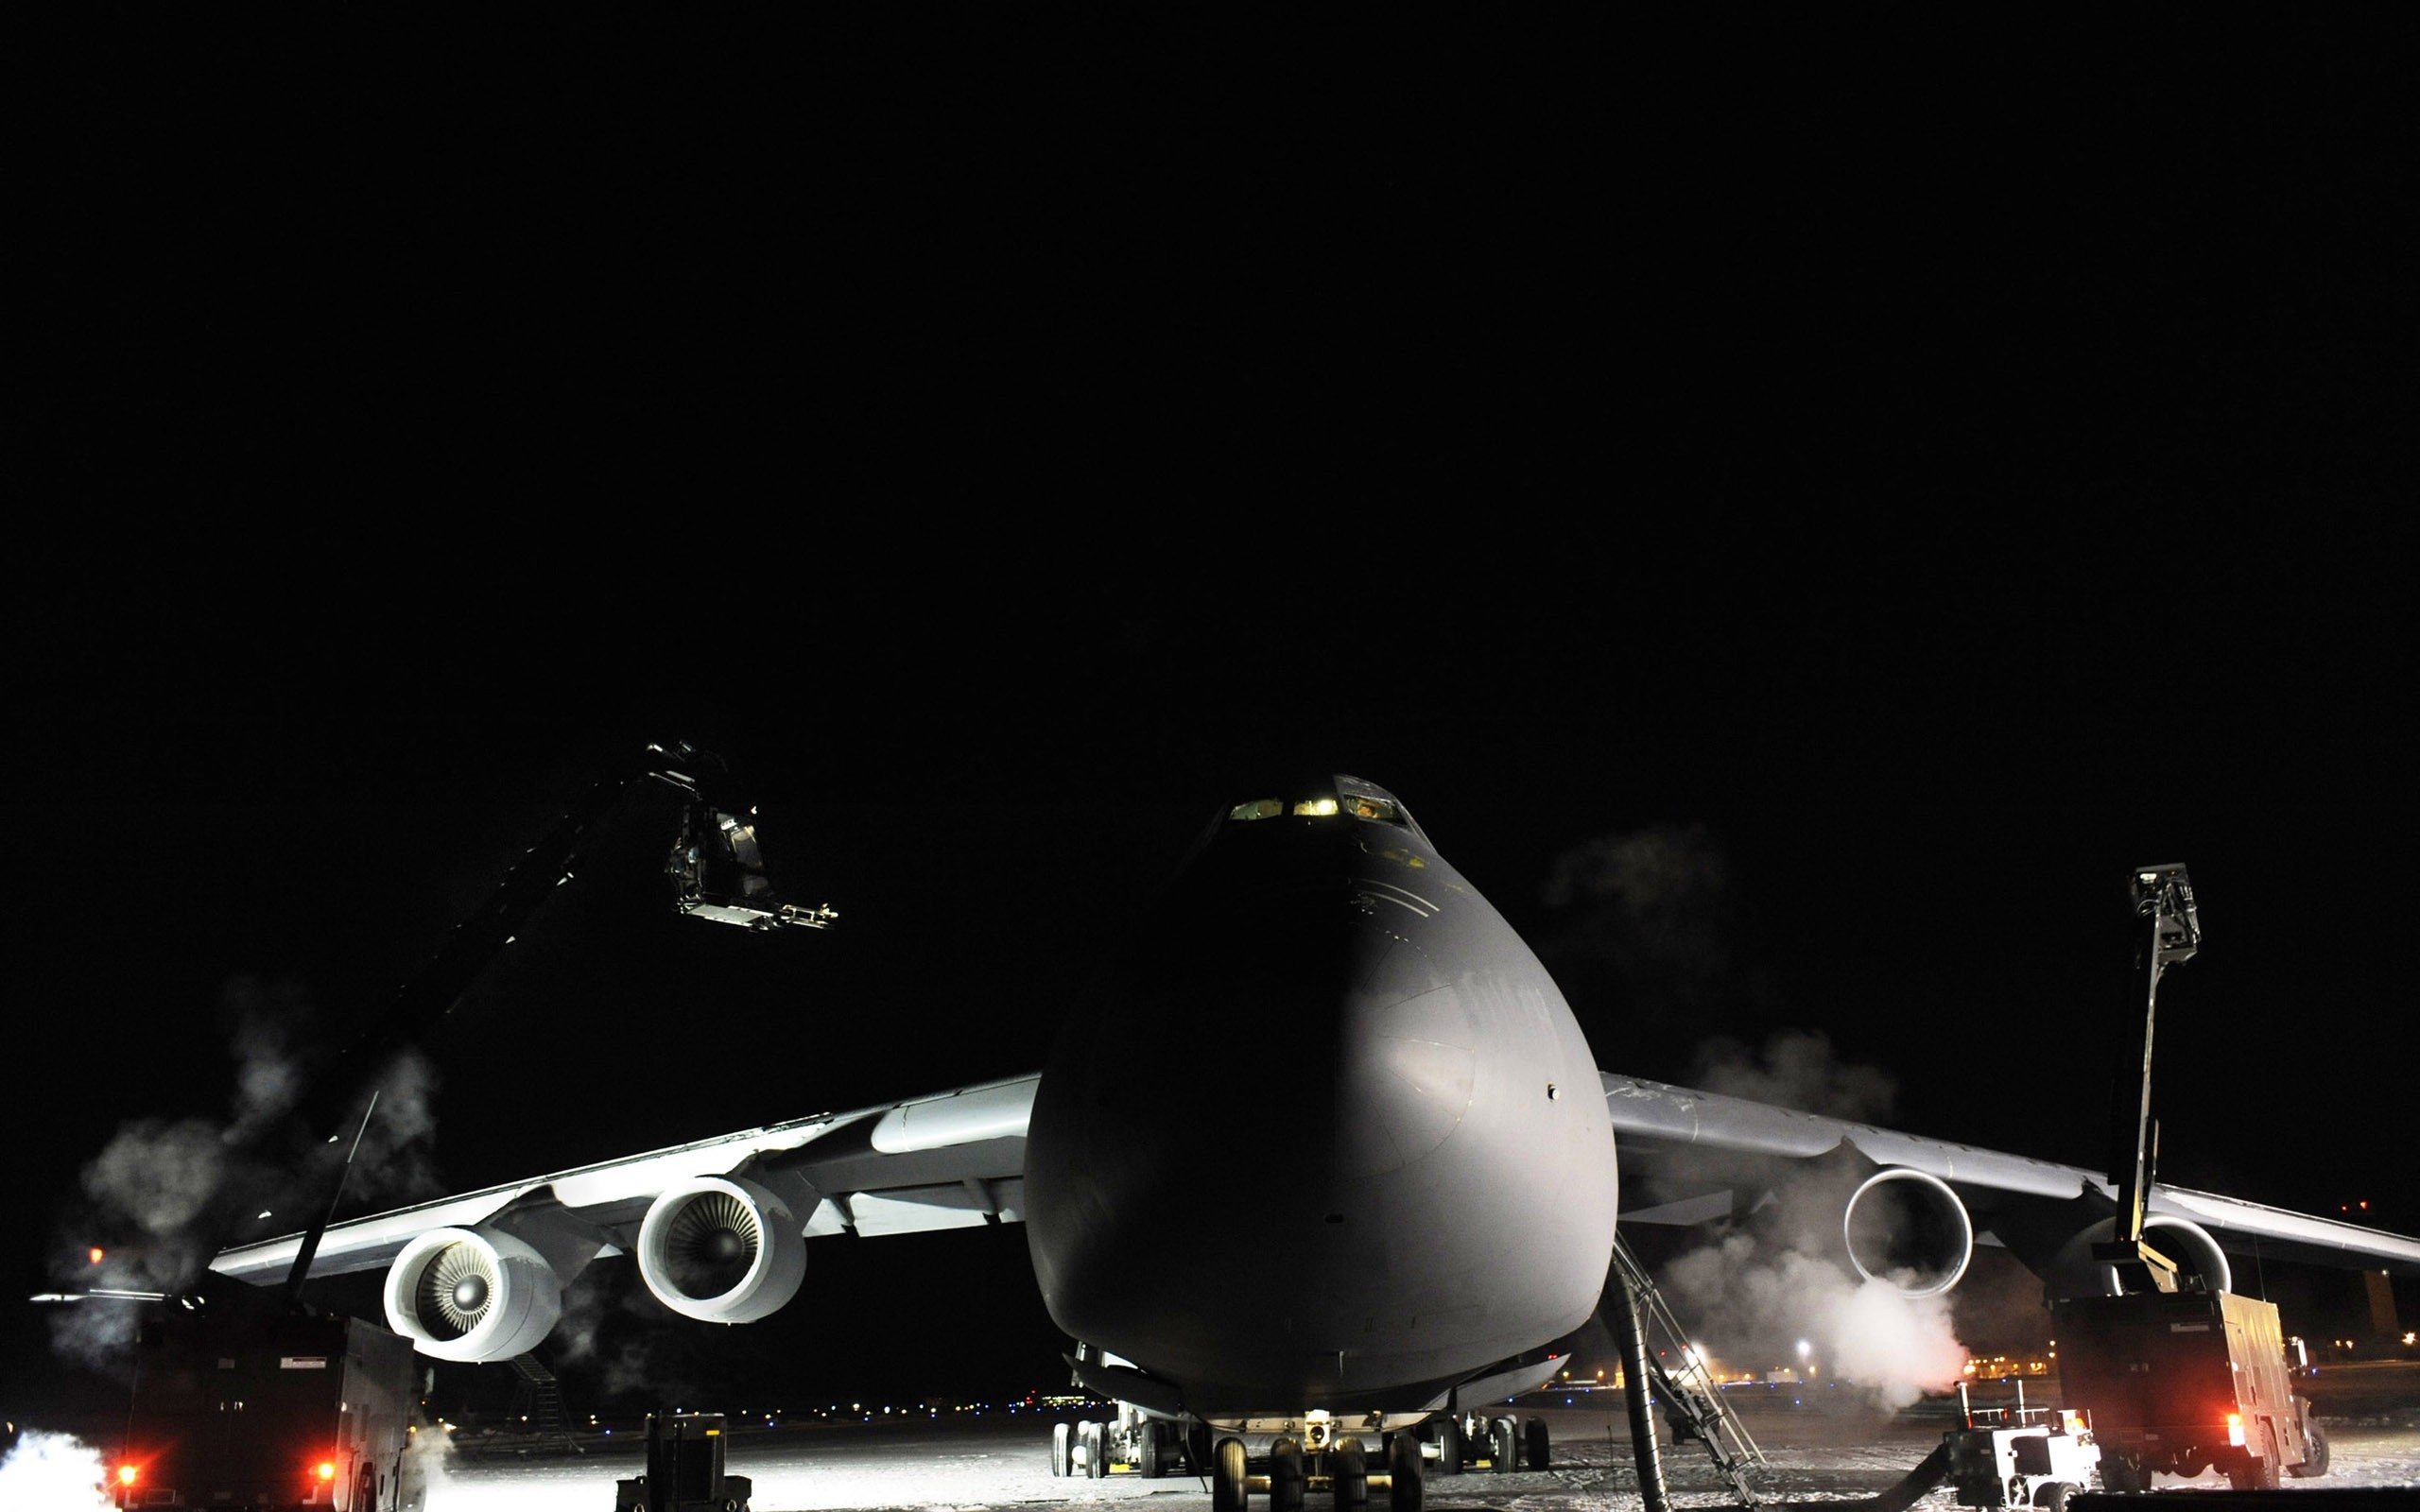 2560x1600 C 5 Galaxy US Air Force wallpapers (64 Wallpapers)